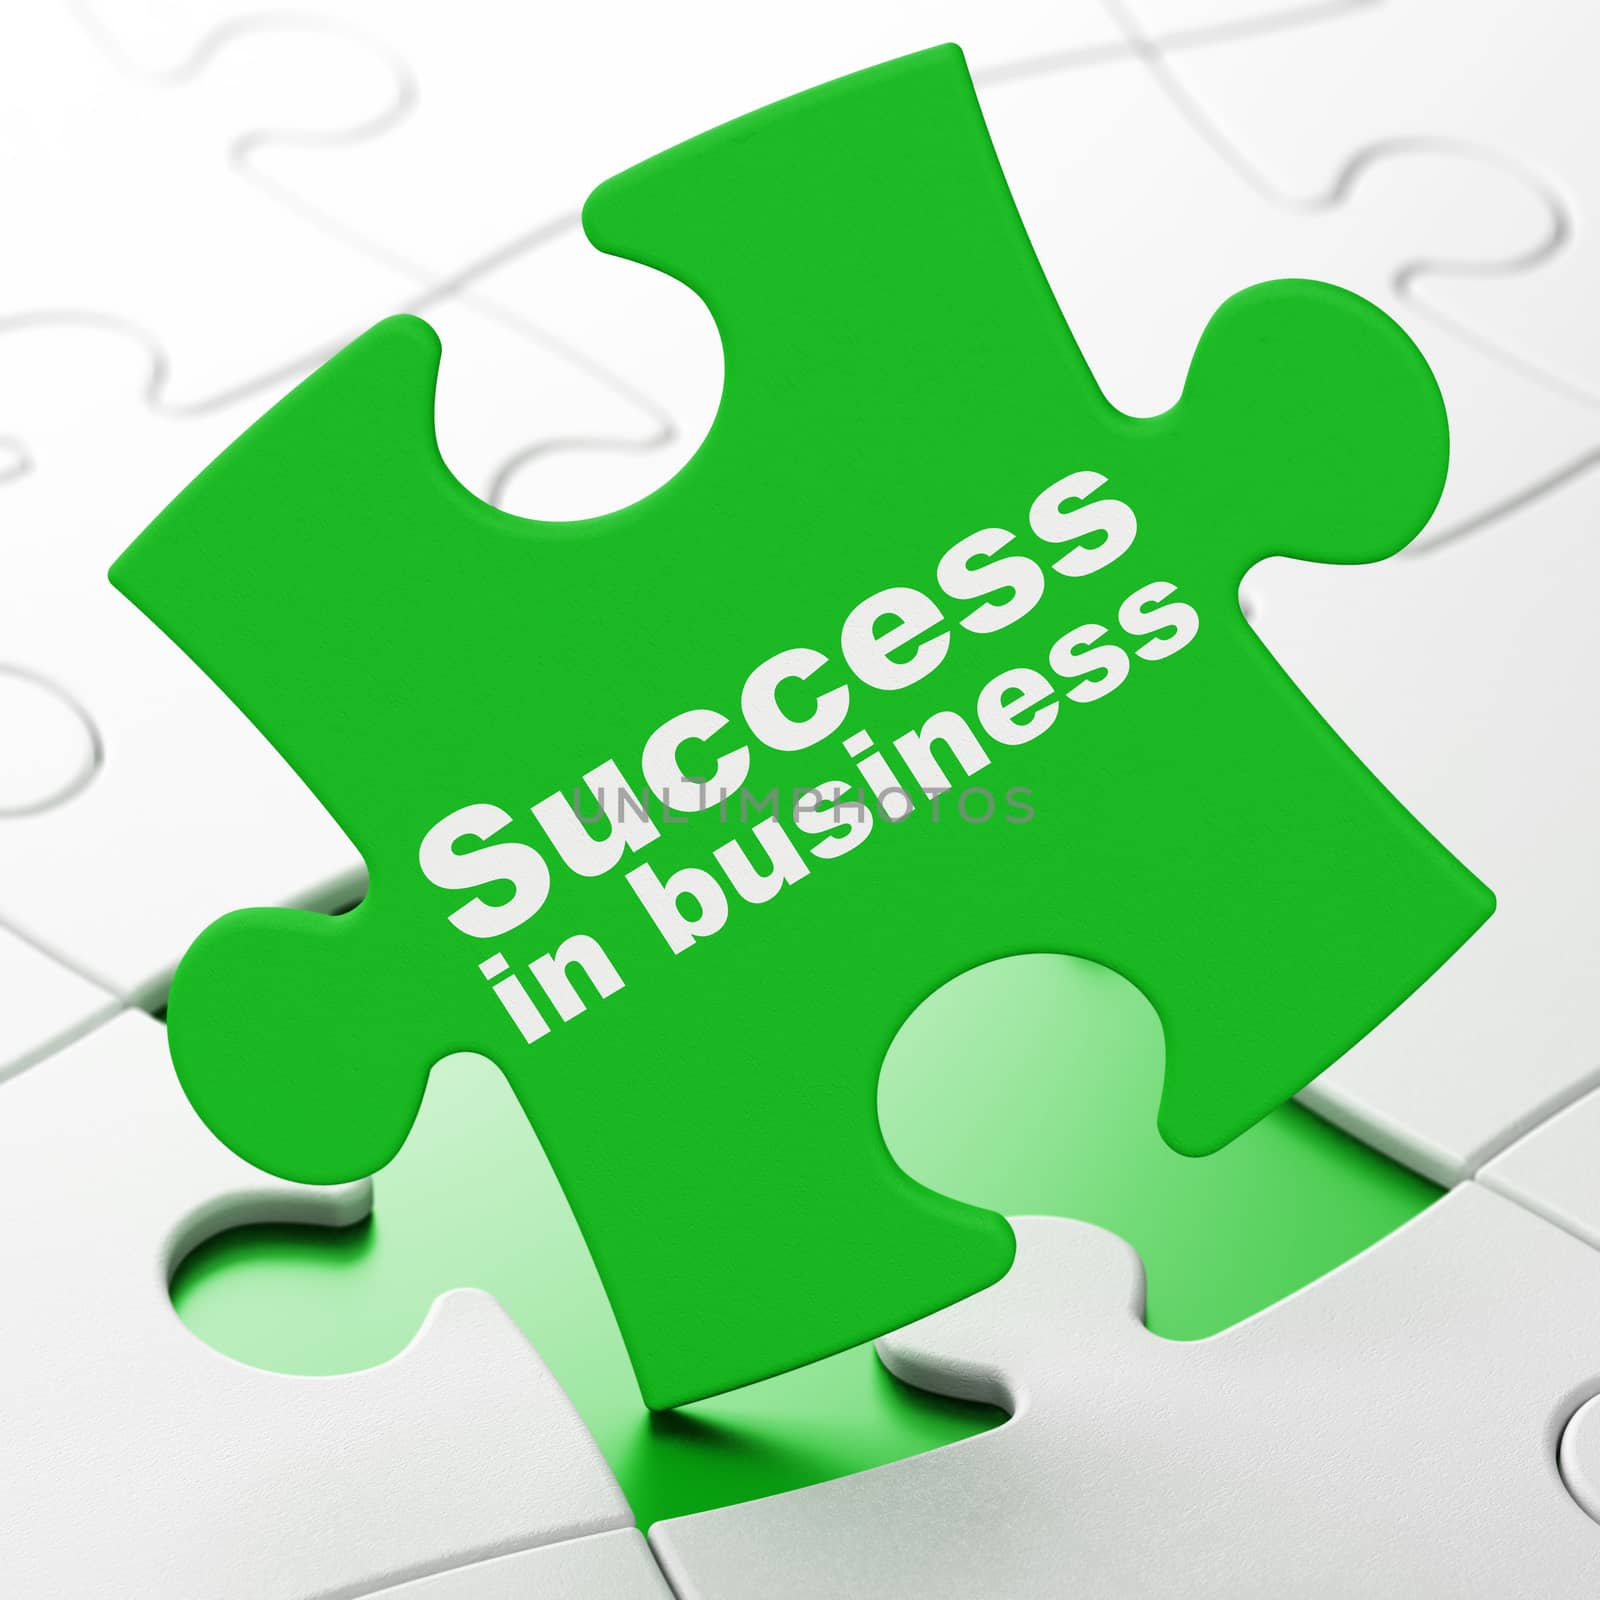 Business concept: Success In business on Green puzzle pieces background, 3D rendering